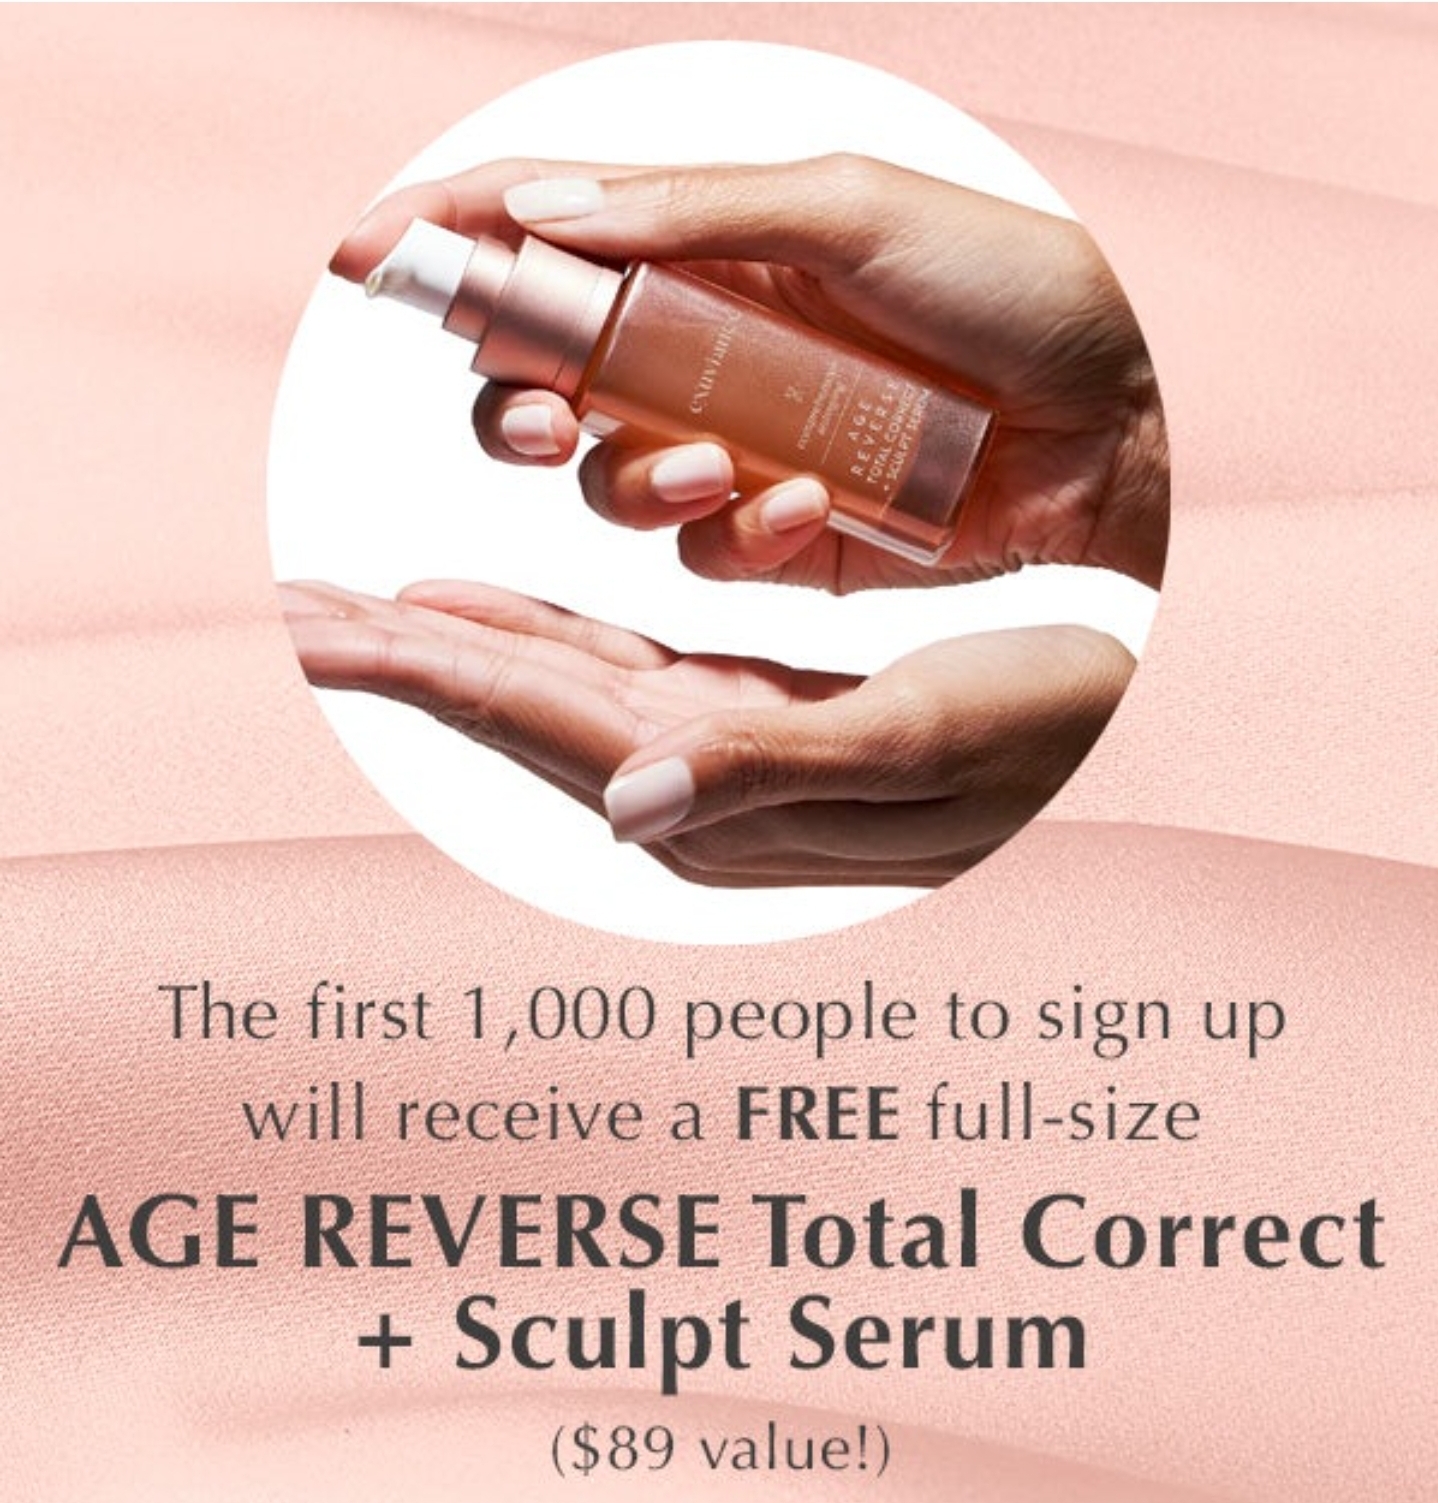 FREE EXUVIANCE AGE REVERSE TOTAL CORRECT + SCULT SERUM